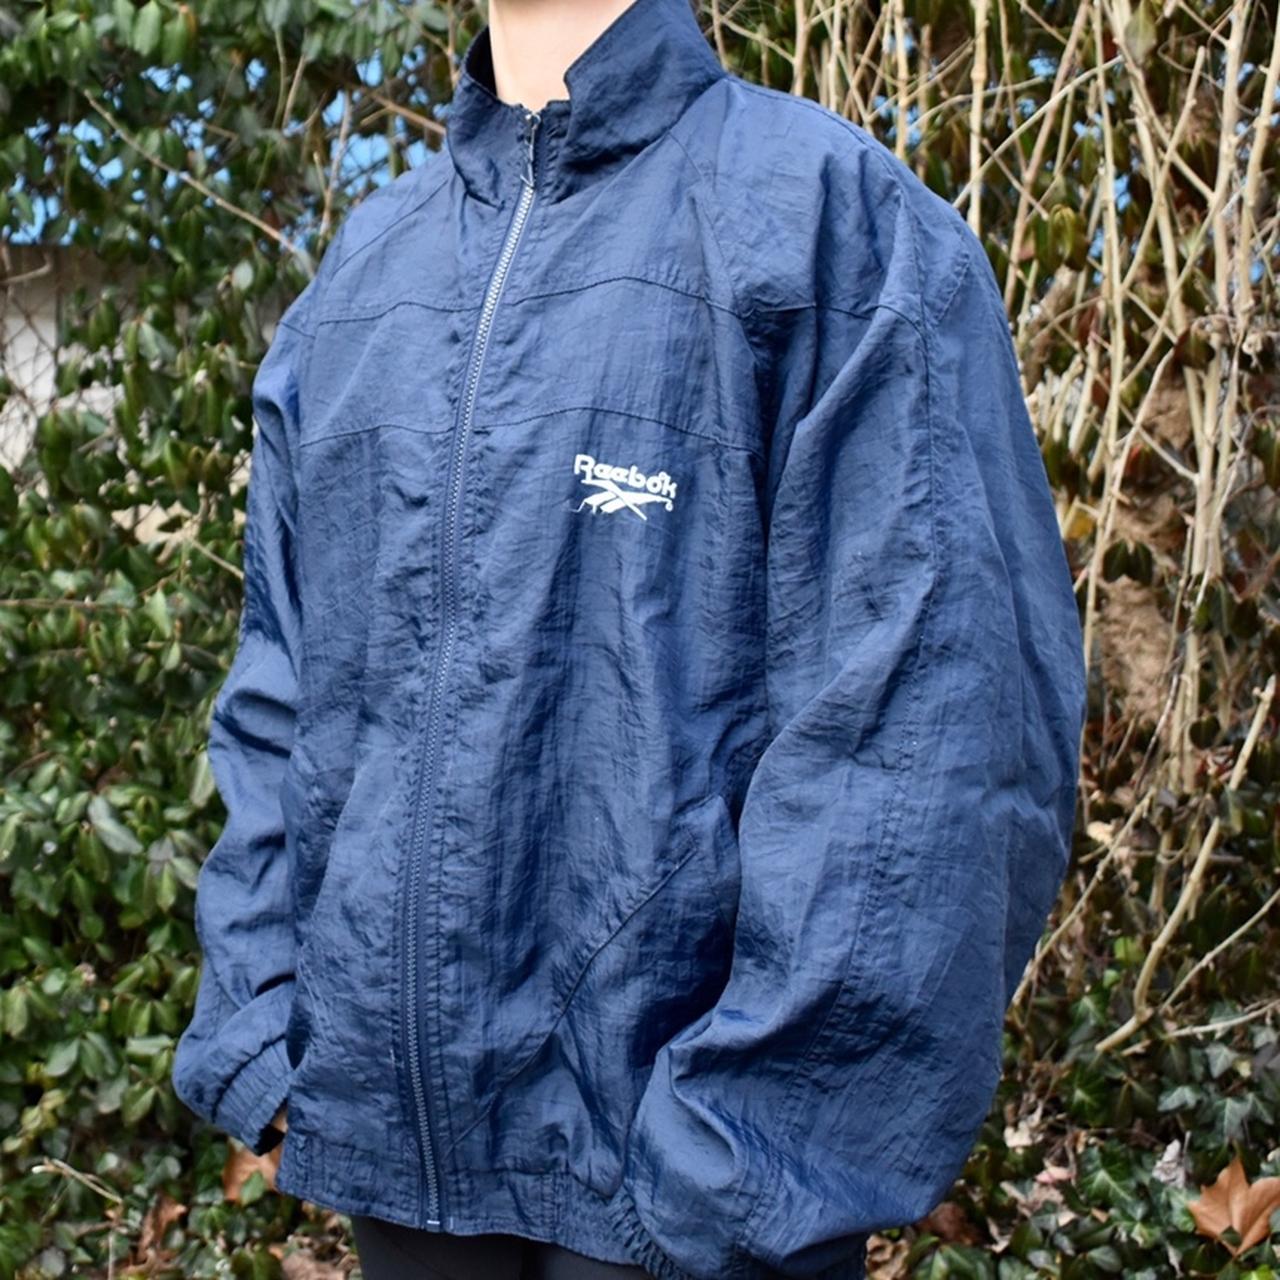 Product Image 1 - Vintage Reebok Windbreaker

Size: Large
Condition: Worn
Color: